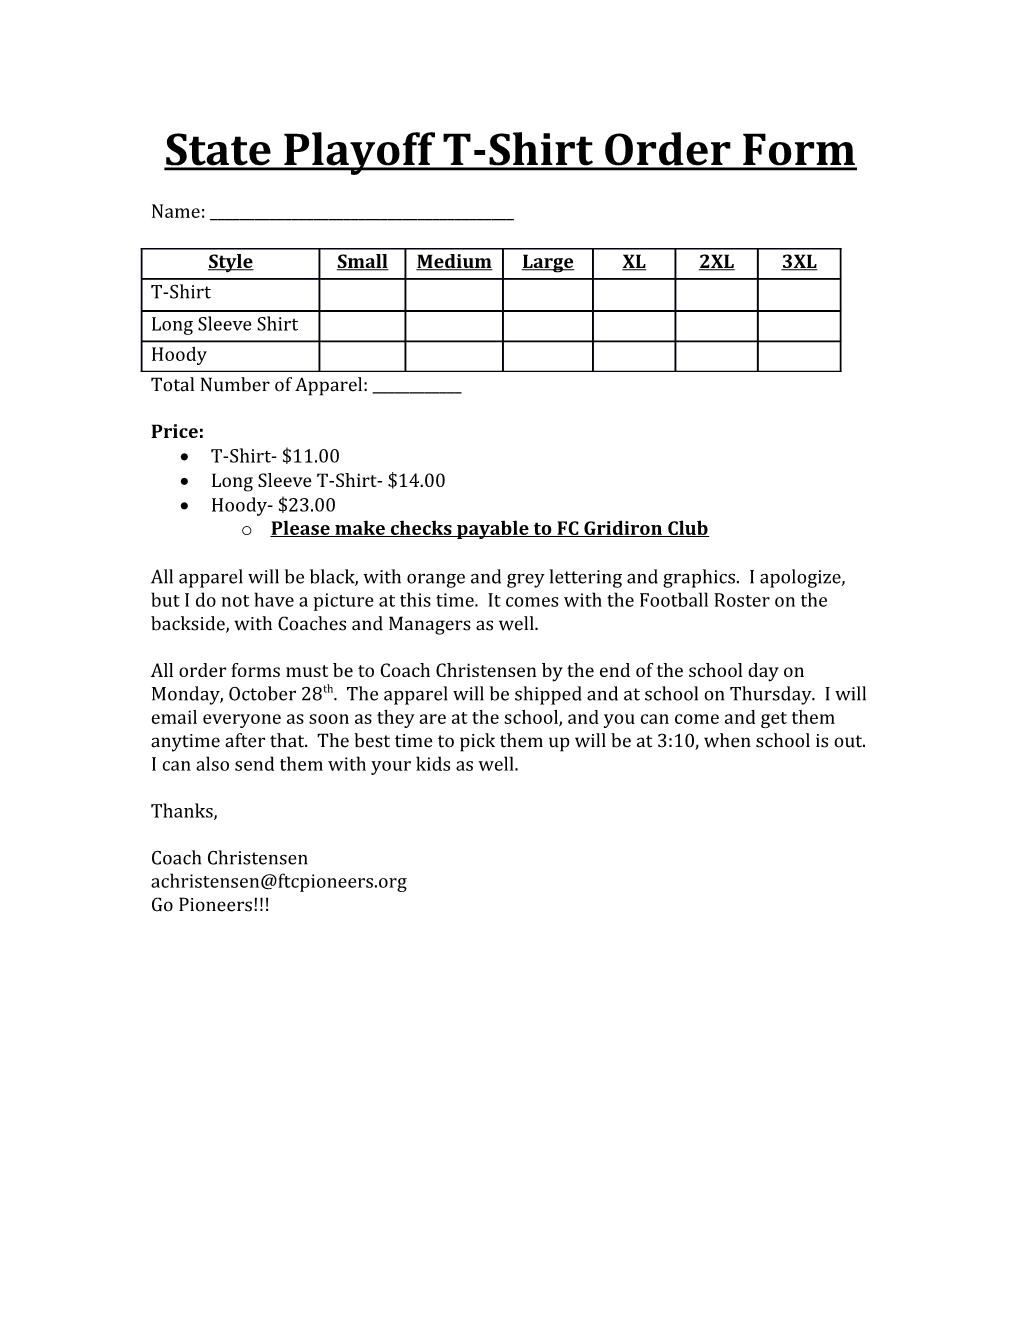 State Playoff T-Shirt Order Form